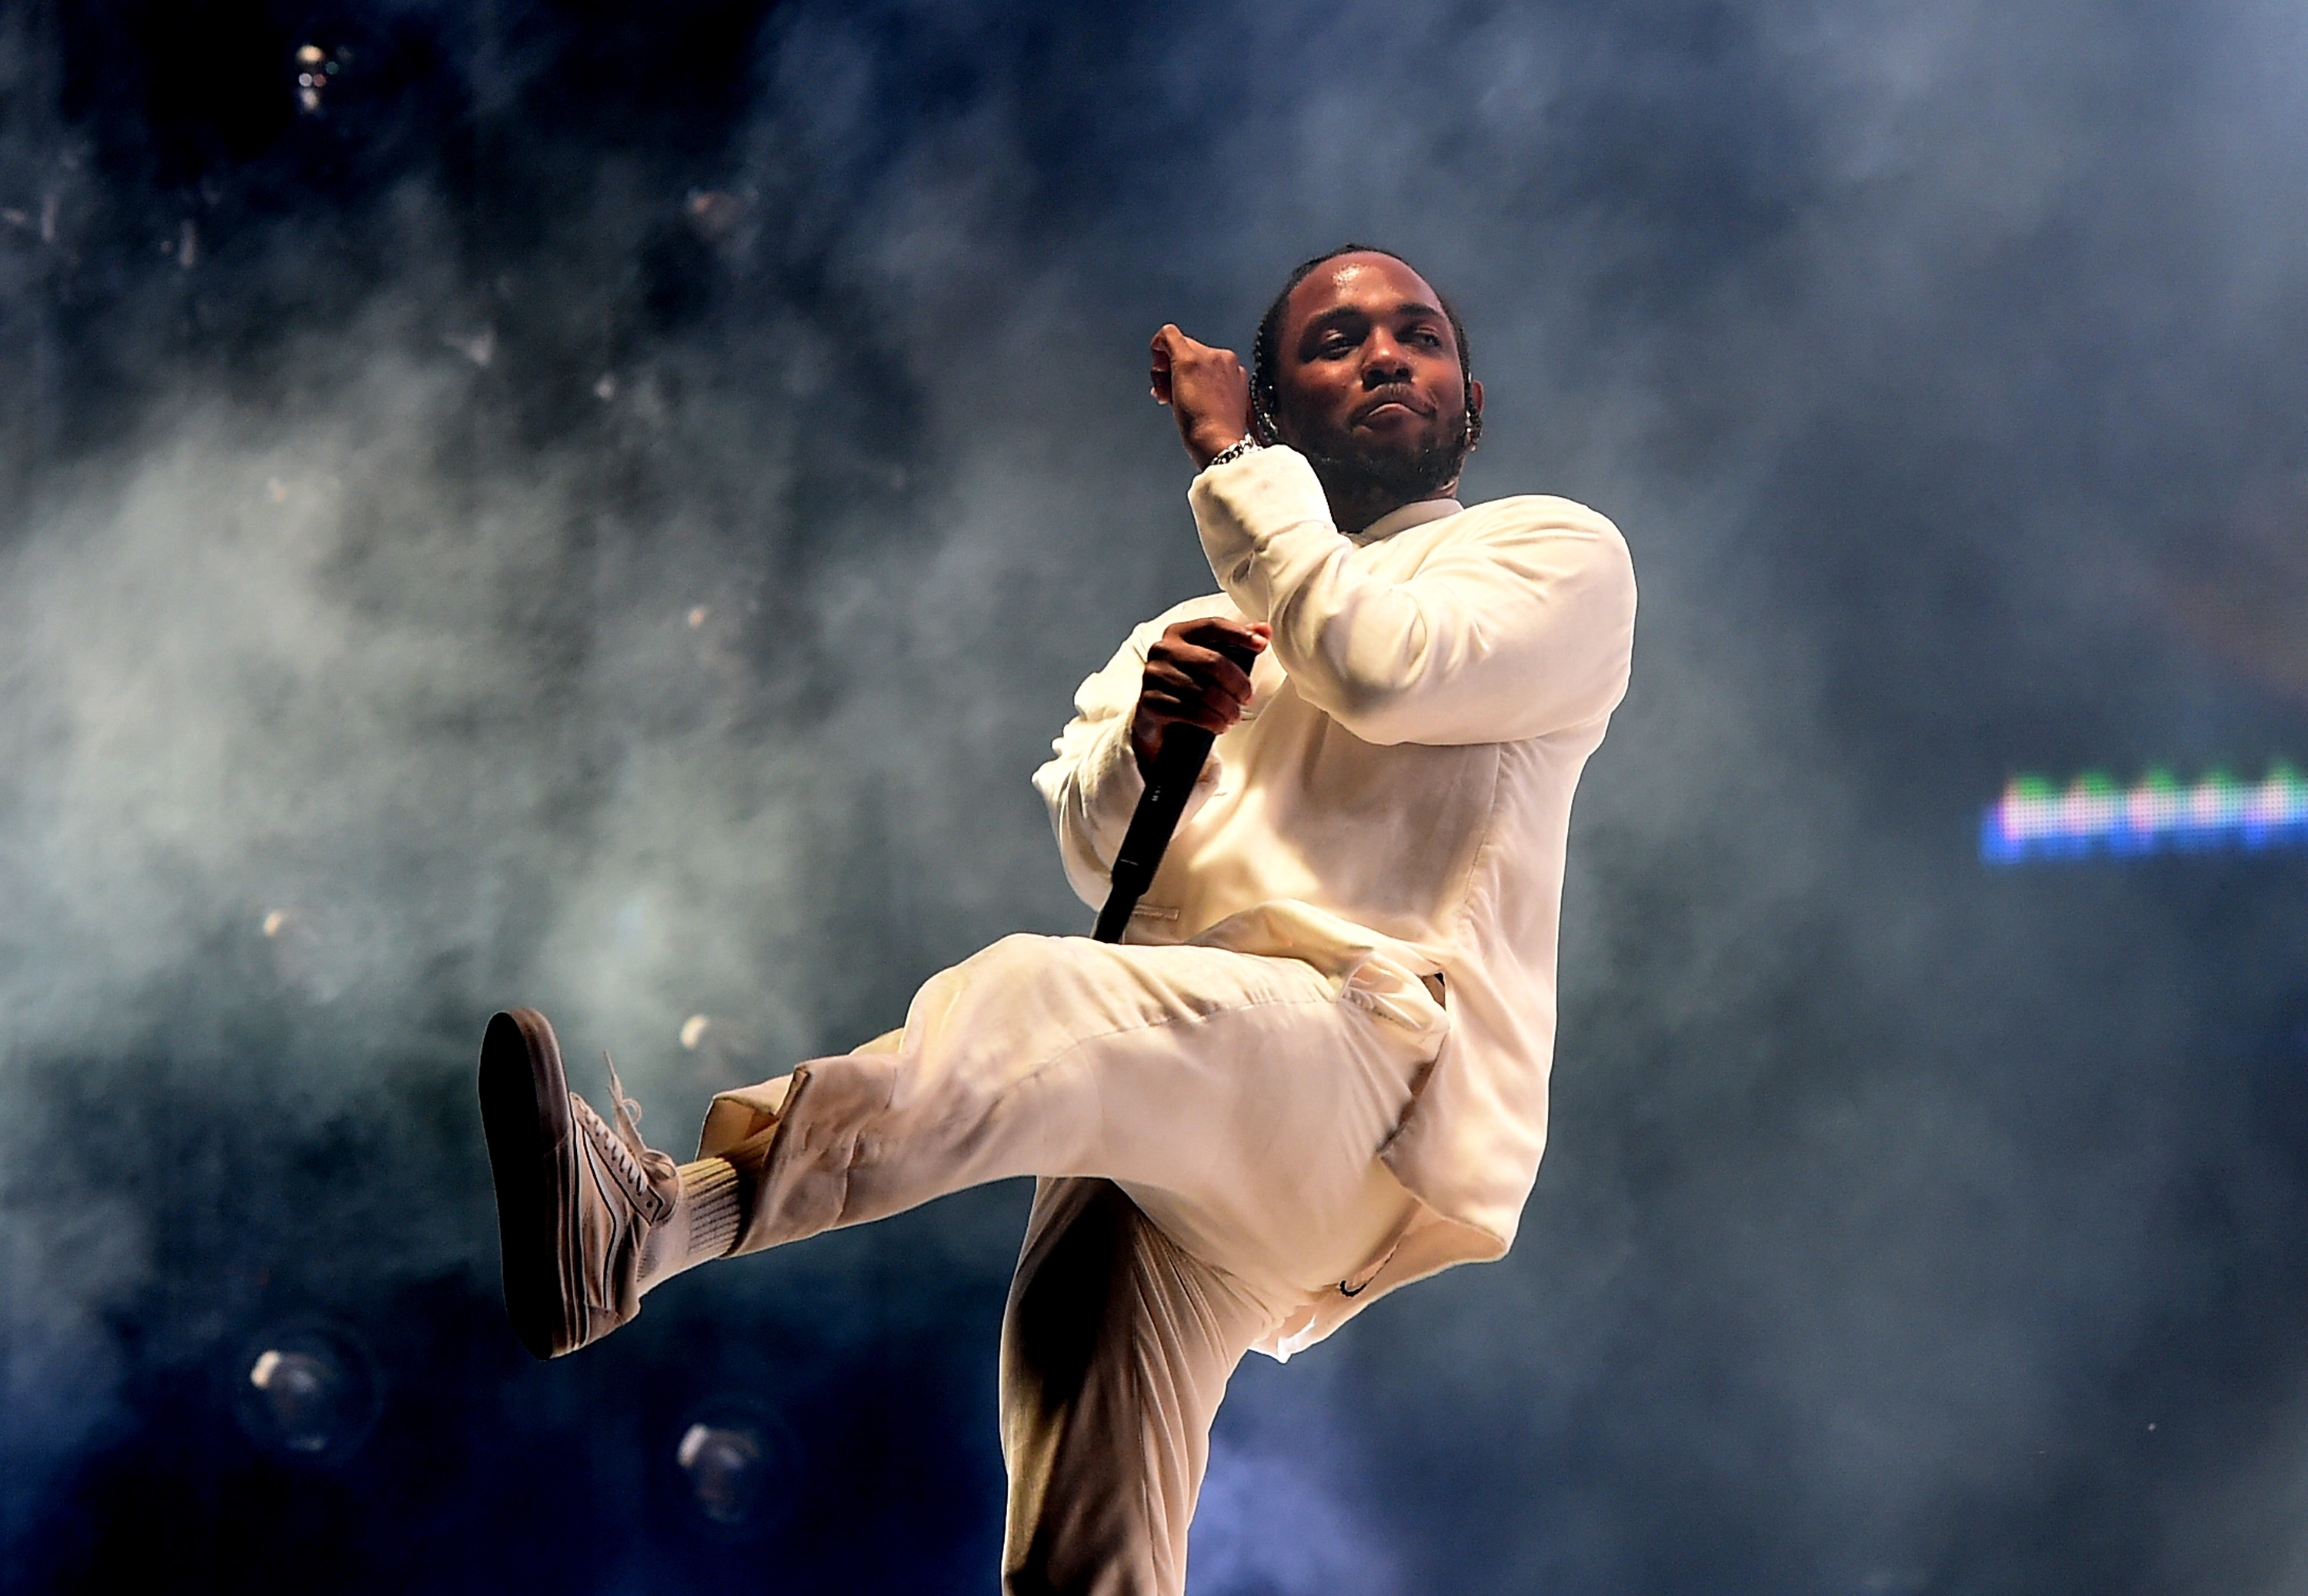 Kendrick Lamar Wins Best Rap Song for “The Heart Part 5” at the